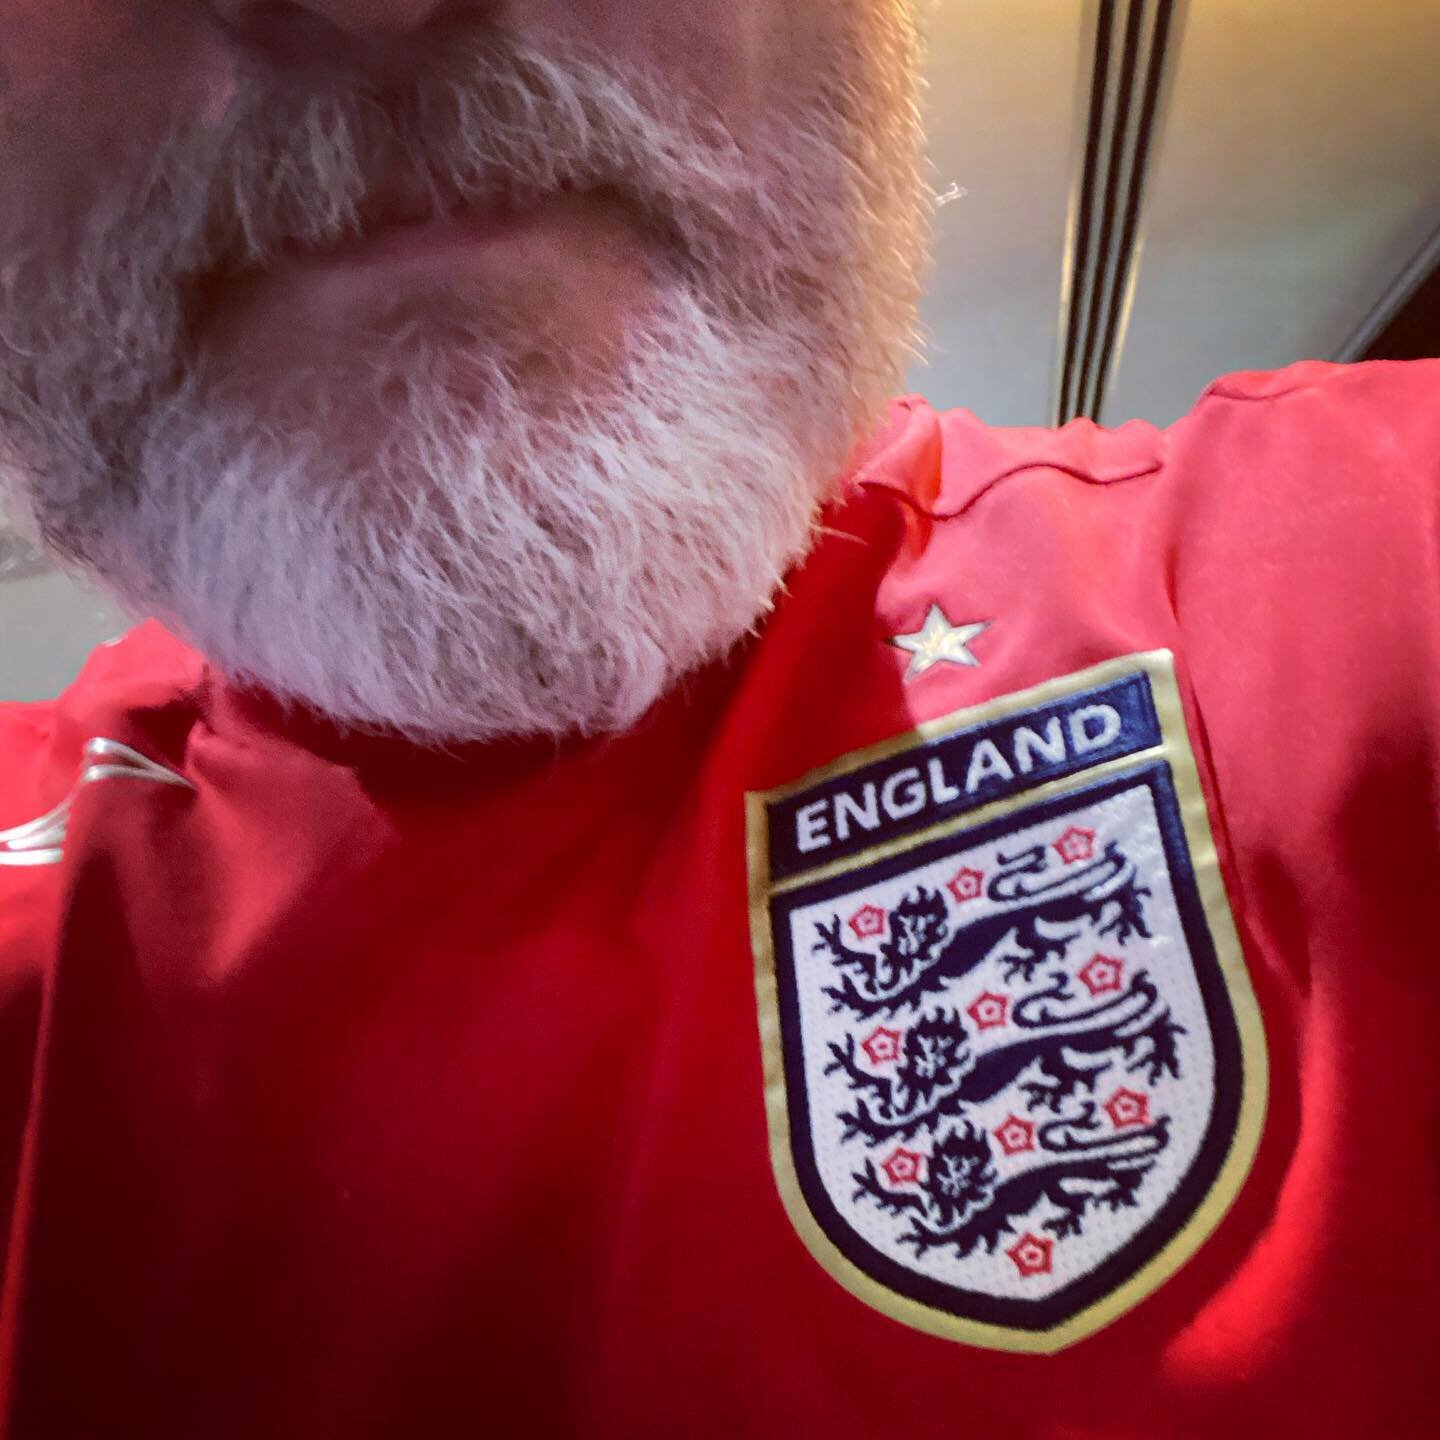 Let&rsquo;s not get lost in the result. Let&rsquo;s remember how they played, what they stood for and what they achieved. Football has indeed come home. True role models. I have never felt more proud of this shirt. #england #england🇬🇧 #euro2020 #pr